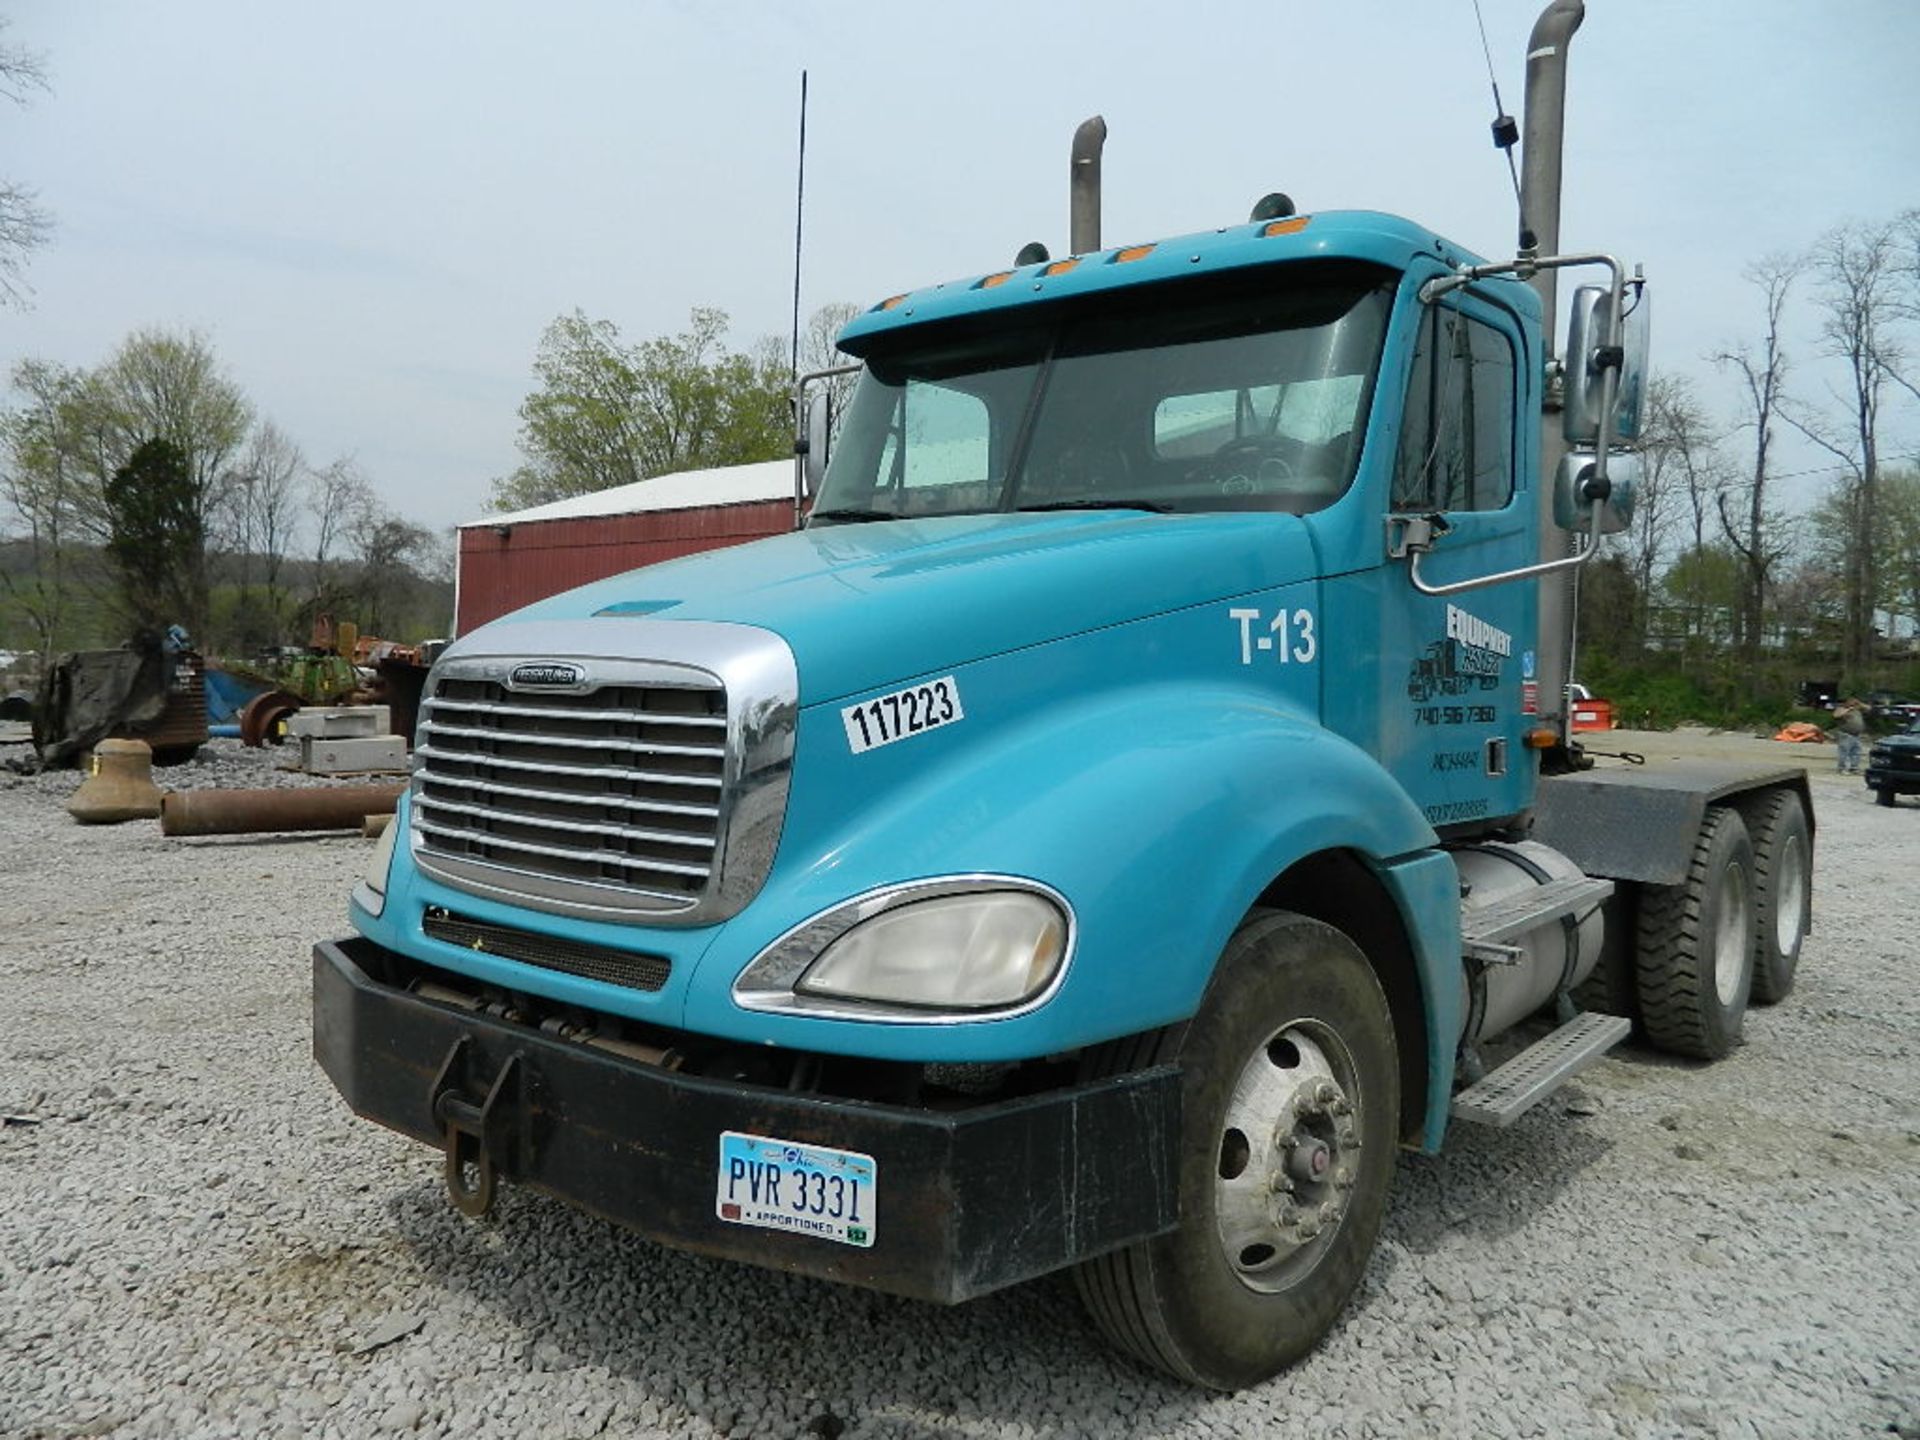 2004 FREIGHTLINER T/A DAY CAB TRUCK, CAT C15/435 DIESEL, 13-SPEED, WETLINE KIT, WITH 100-GALLON